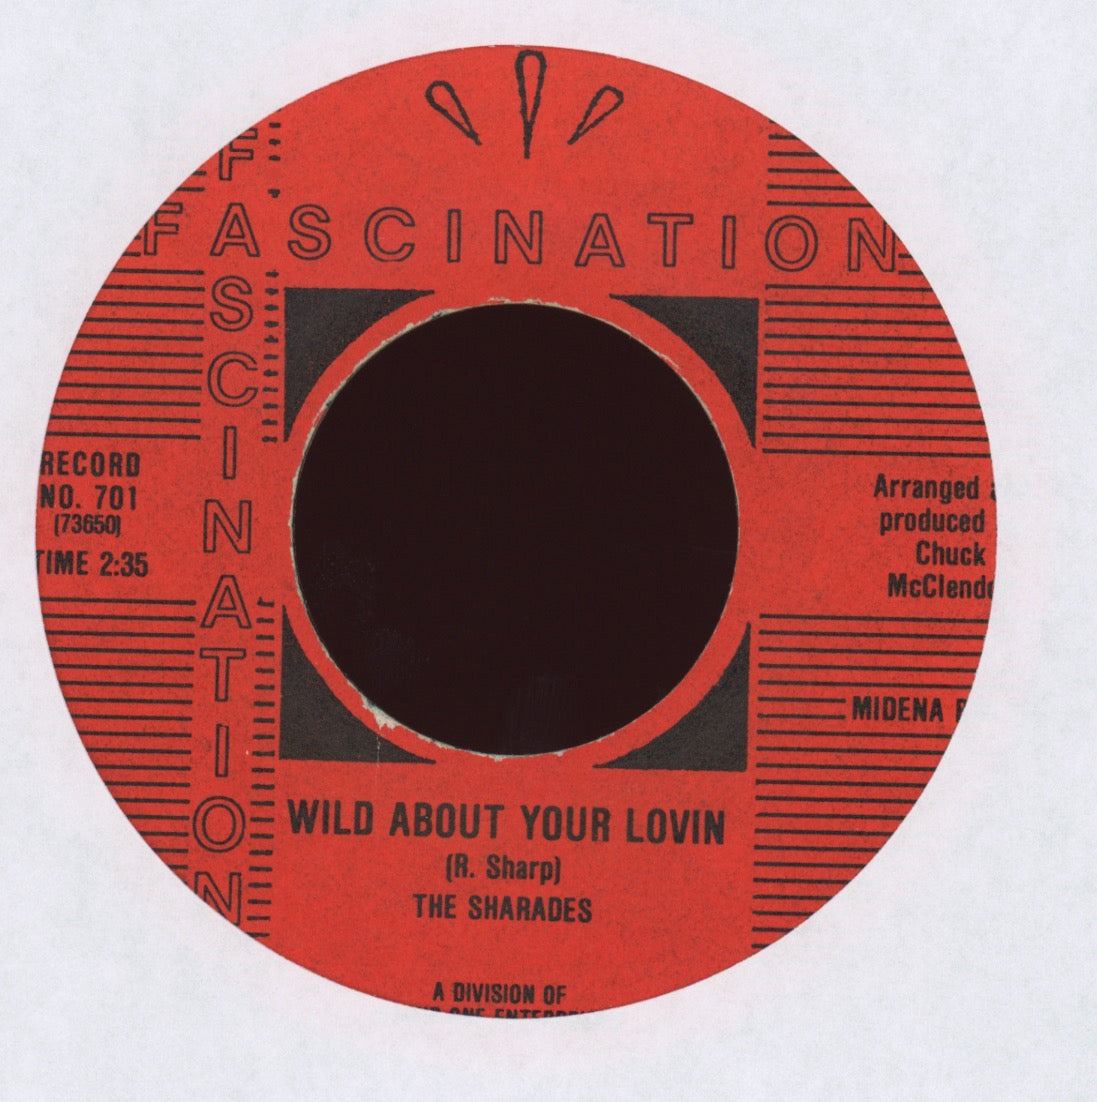 The Sharades - Wild About Your Lovin' / Only a Tear on Fascination